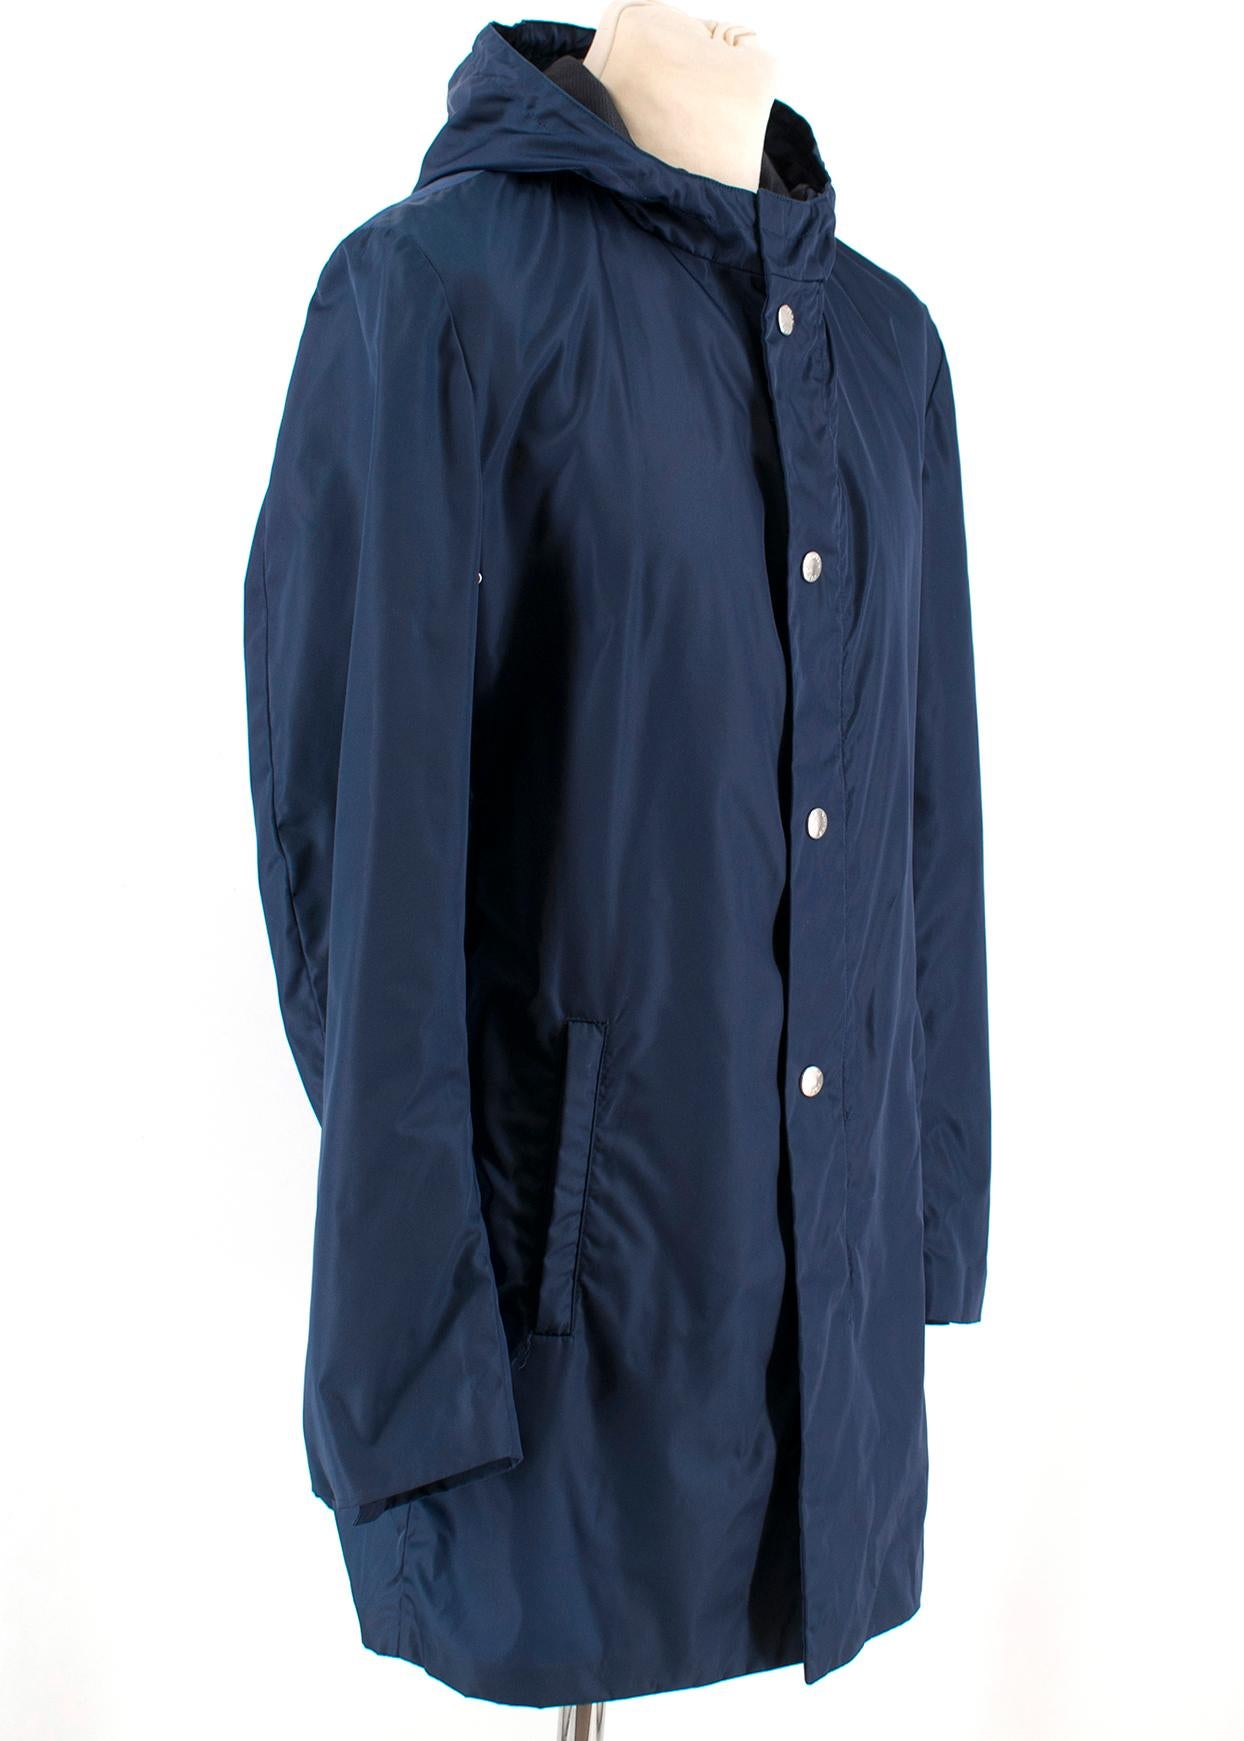 Prada Navy Blue Nylon Water-Proof Jacket 

- Engraved Logo Buttons 
- Front Zip and Snap Button Closure 
- Long Sleeved
- Attached Hood 
- Side Zip Pockets 
- Central Back Slit 

100% Nylon 

Made in Italy 

Measurements are taken with the item